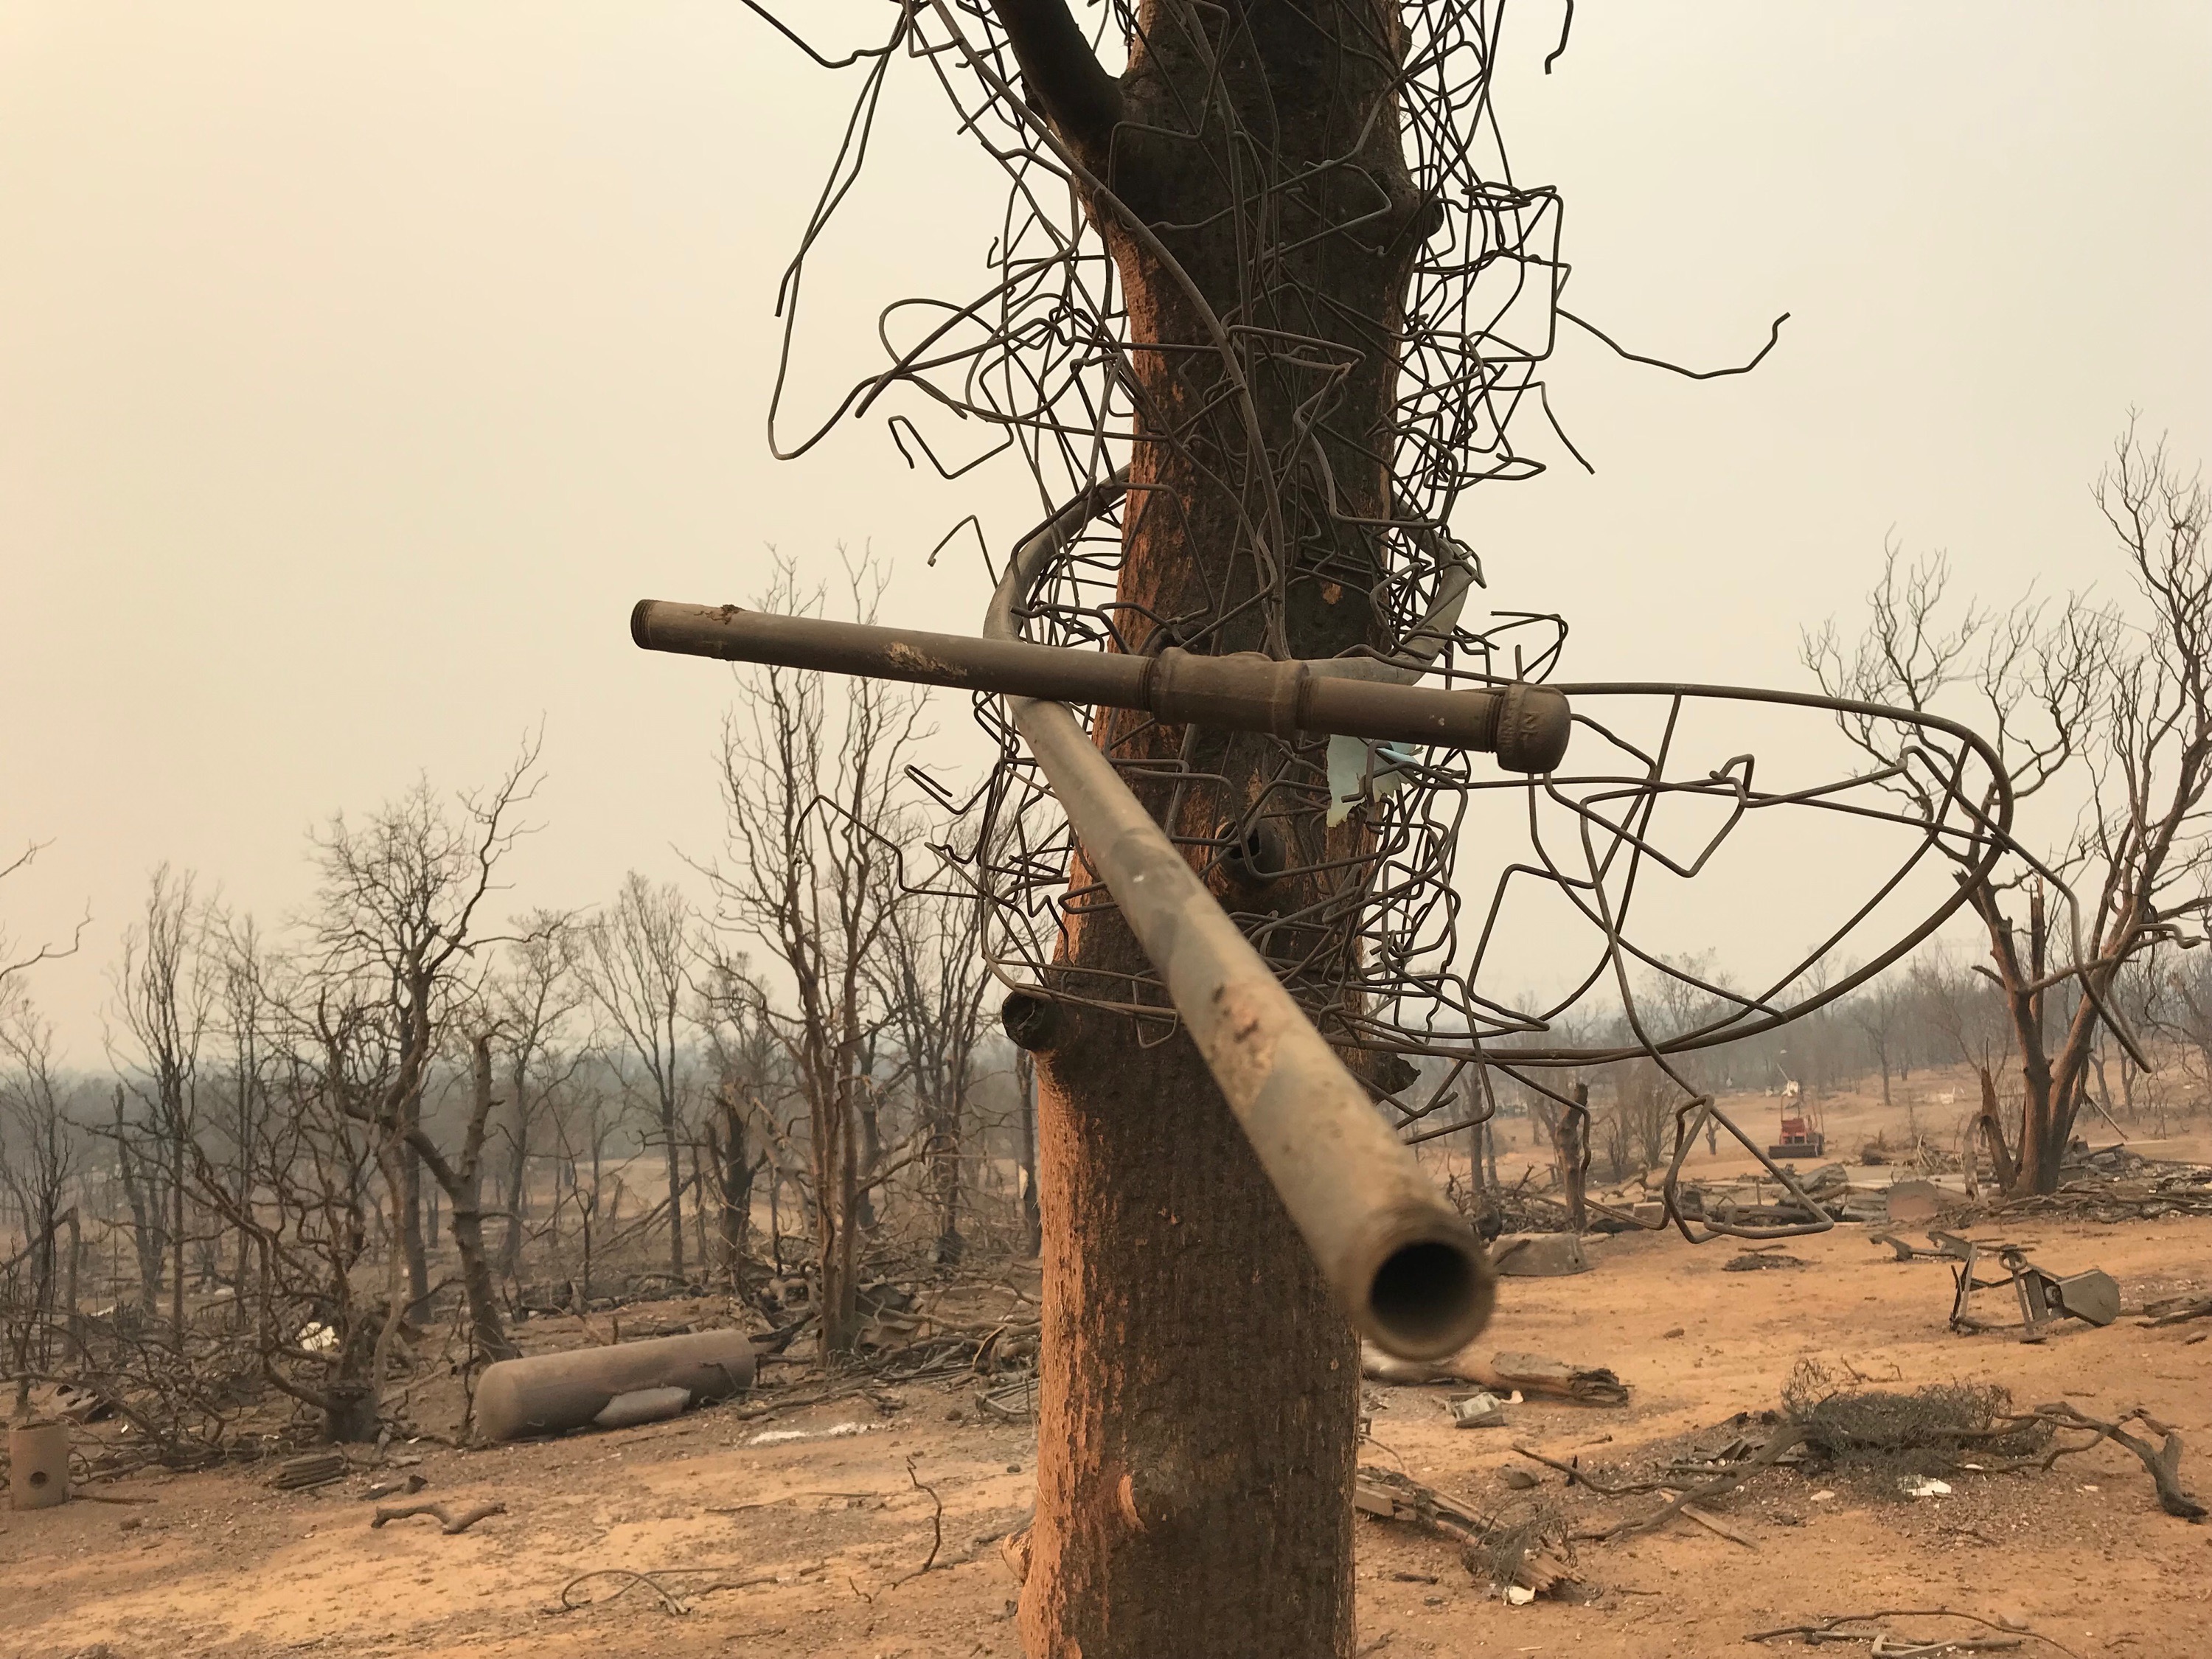 A gas pipe was stuck wrapped around a barren tree after a "fire tornado" erupted during the Carr Fire in Northern California near the city of Redding. (Courtesy of Craig Clements)